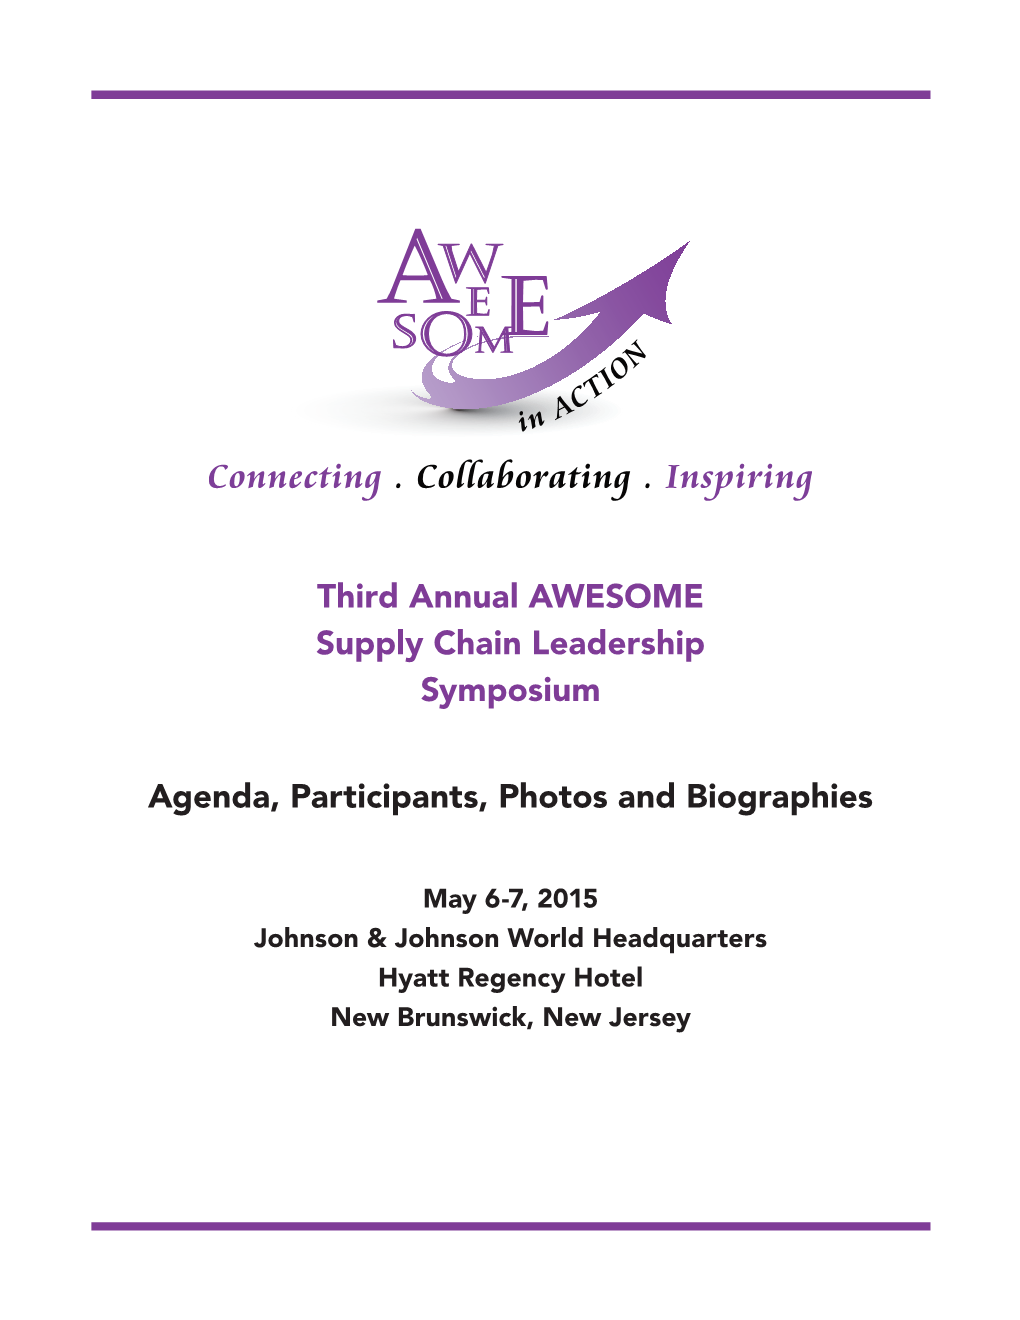 Third Annual AWESOME Supply Chain Leadership Symposium